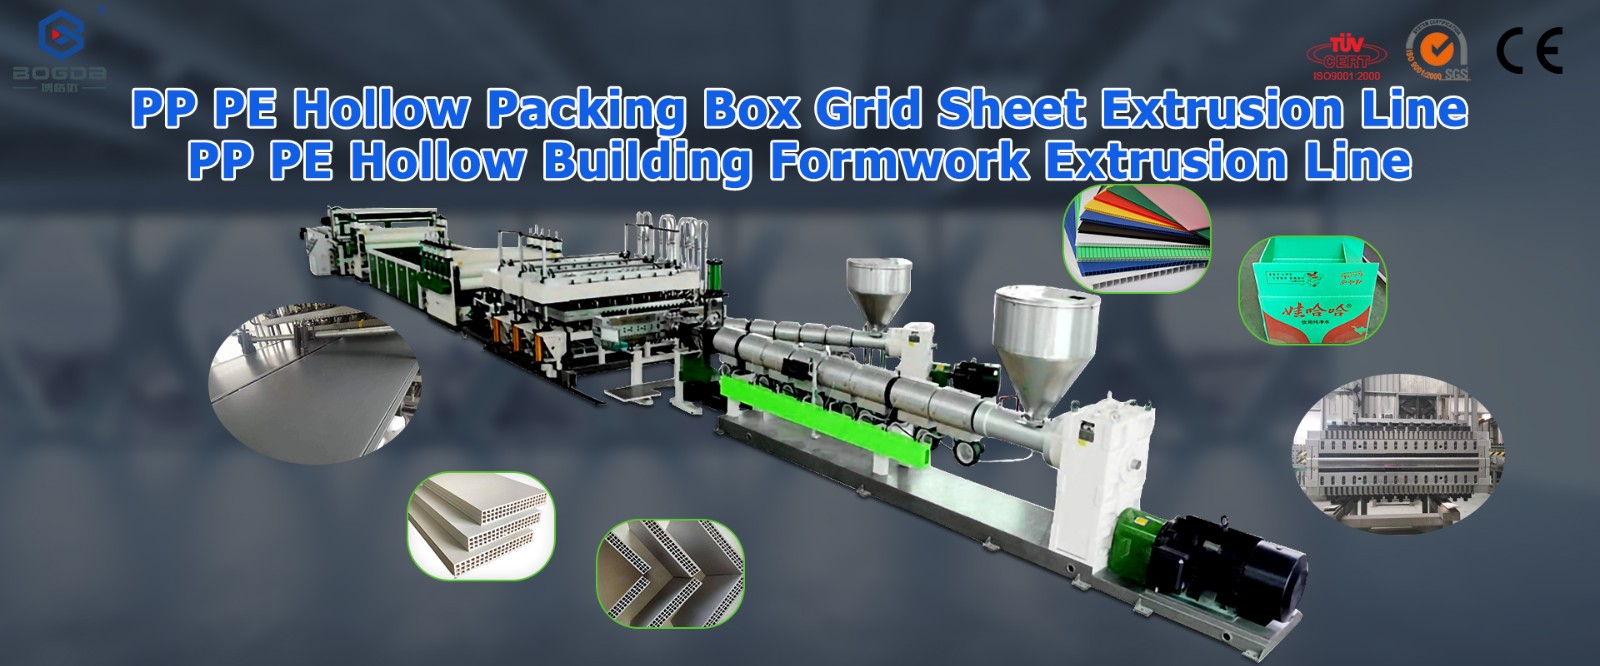 PP PE Hollow Packing Box Grid Sheet Extrusion Line PP PE Hollow Building Formwork Extrusion Line